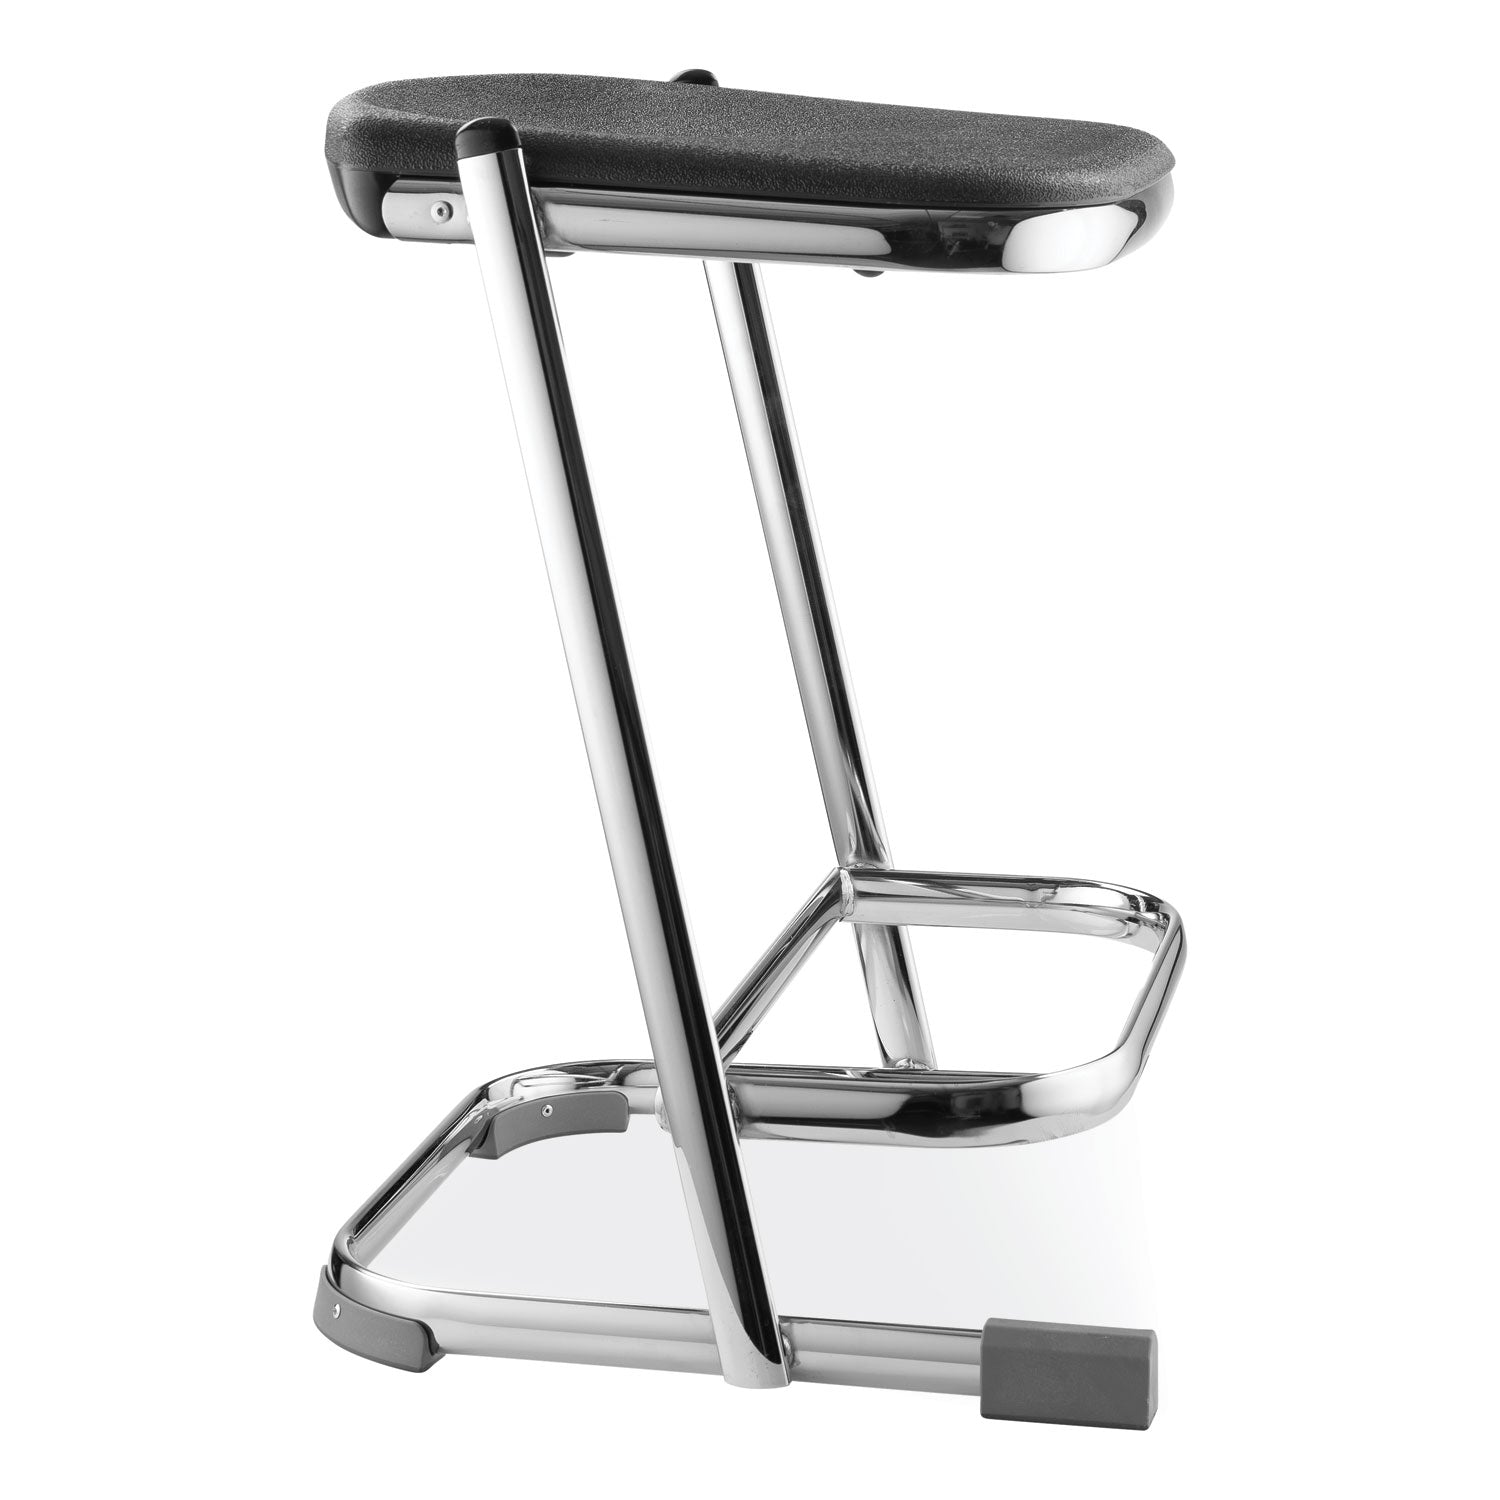 6600-series-elephant-z-stool-backless-supports-up-to-500lb-22-seat-height-black-seat-chrome-frameships-in-1-3-bus-days_nps6622 - 3